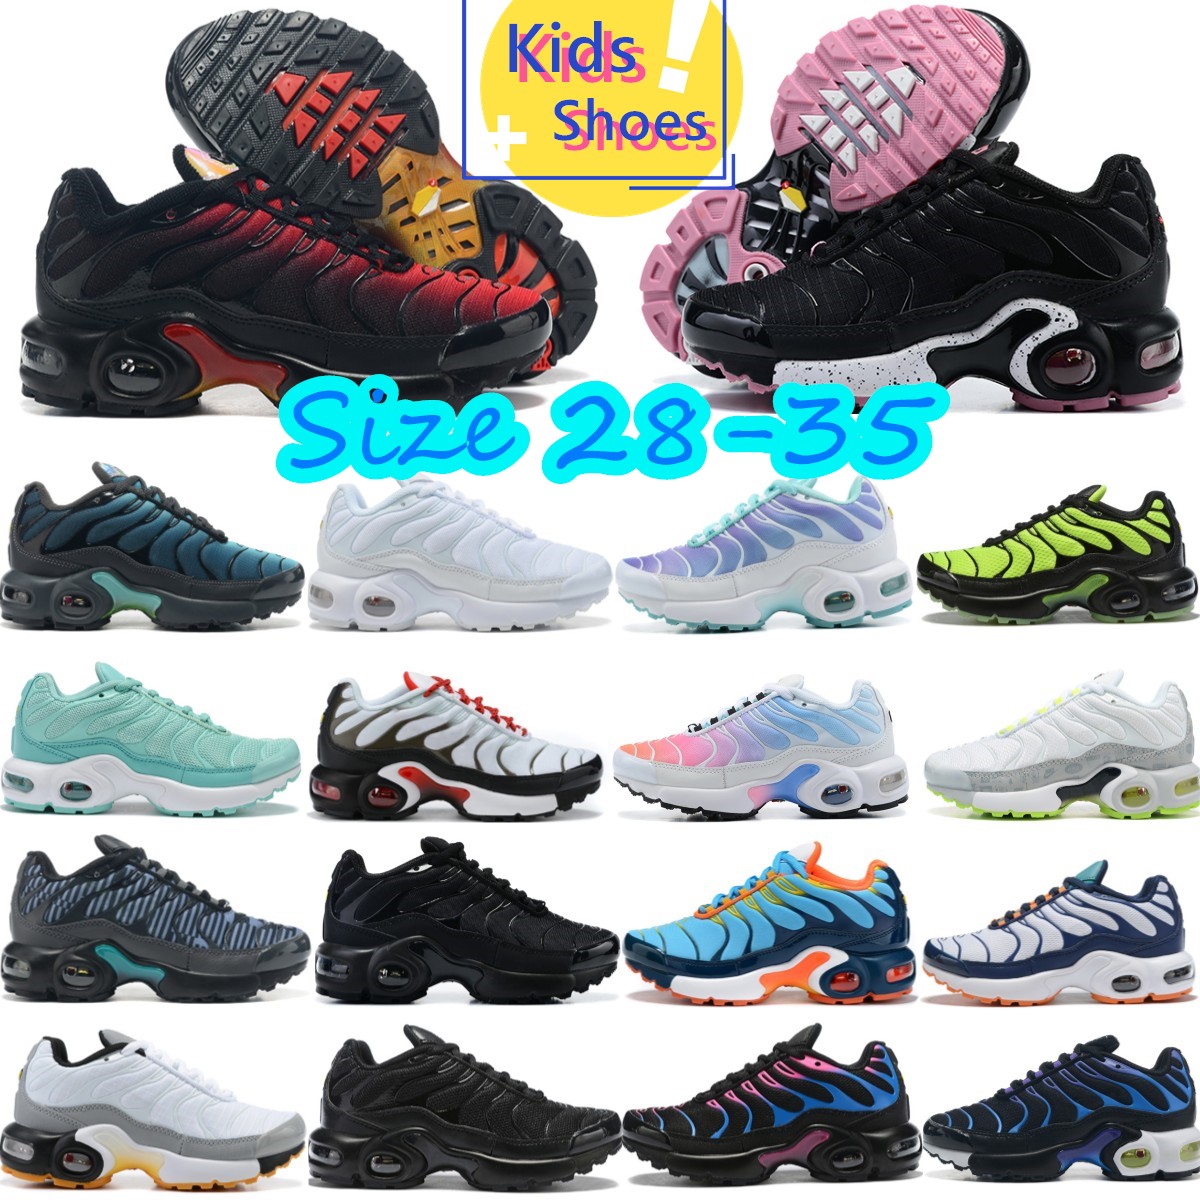 

Enfants Plus tn Toddlers Trainers Kids Shoes Running Sneaker tns Kid Children Youth Boys Girls Classic Toddler Triple Black White Red Miami Vice Summer Gradient Blue